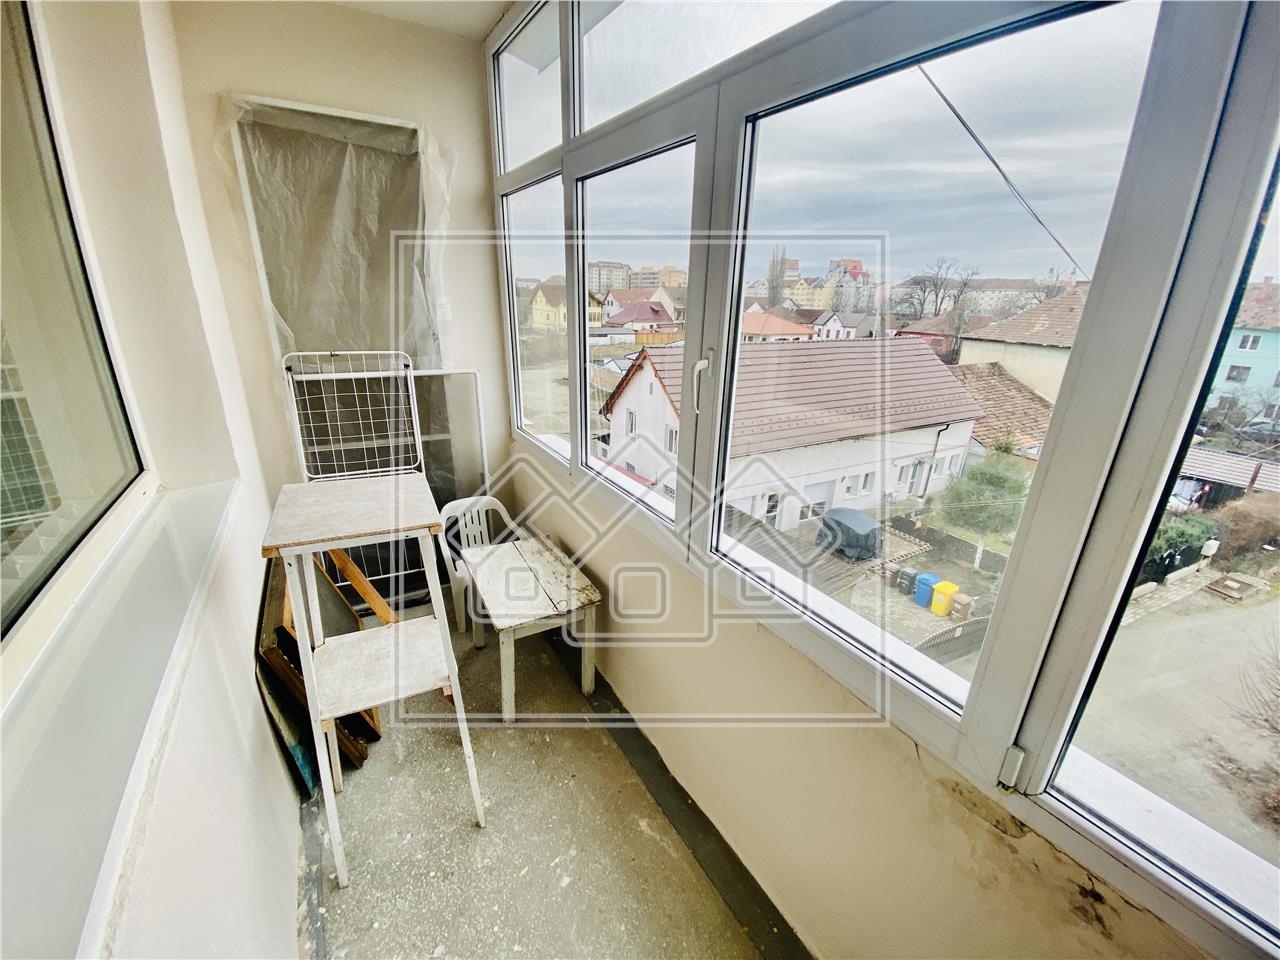 Apartment for sale in Sibiu - 3 rooms and 2 balconies - Lupeni area